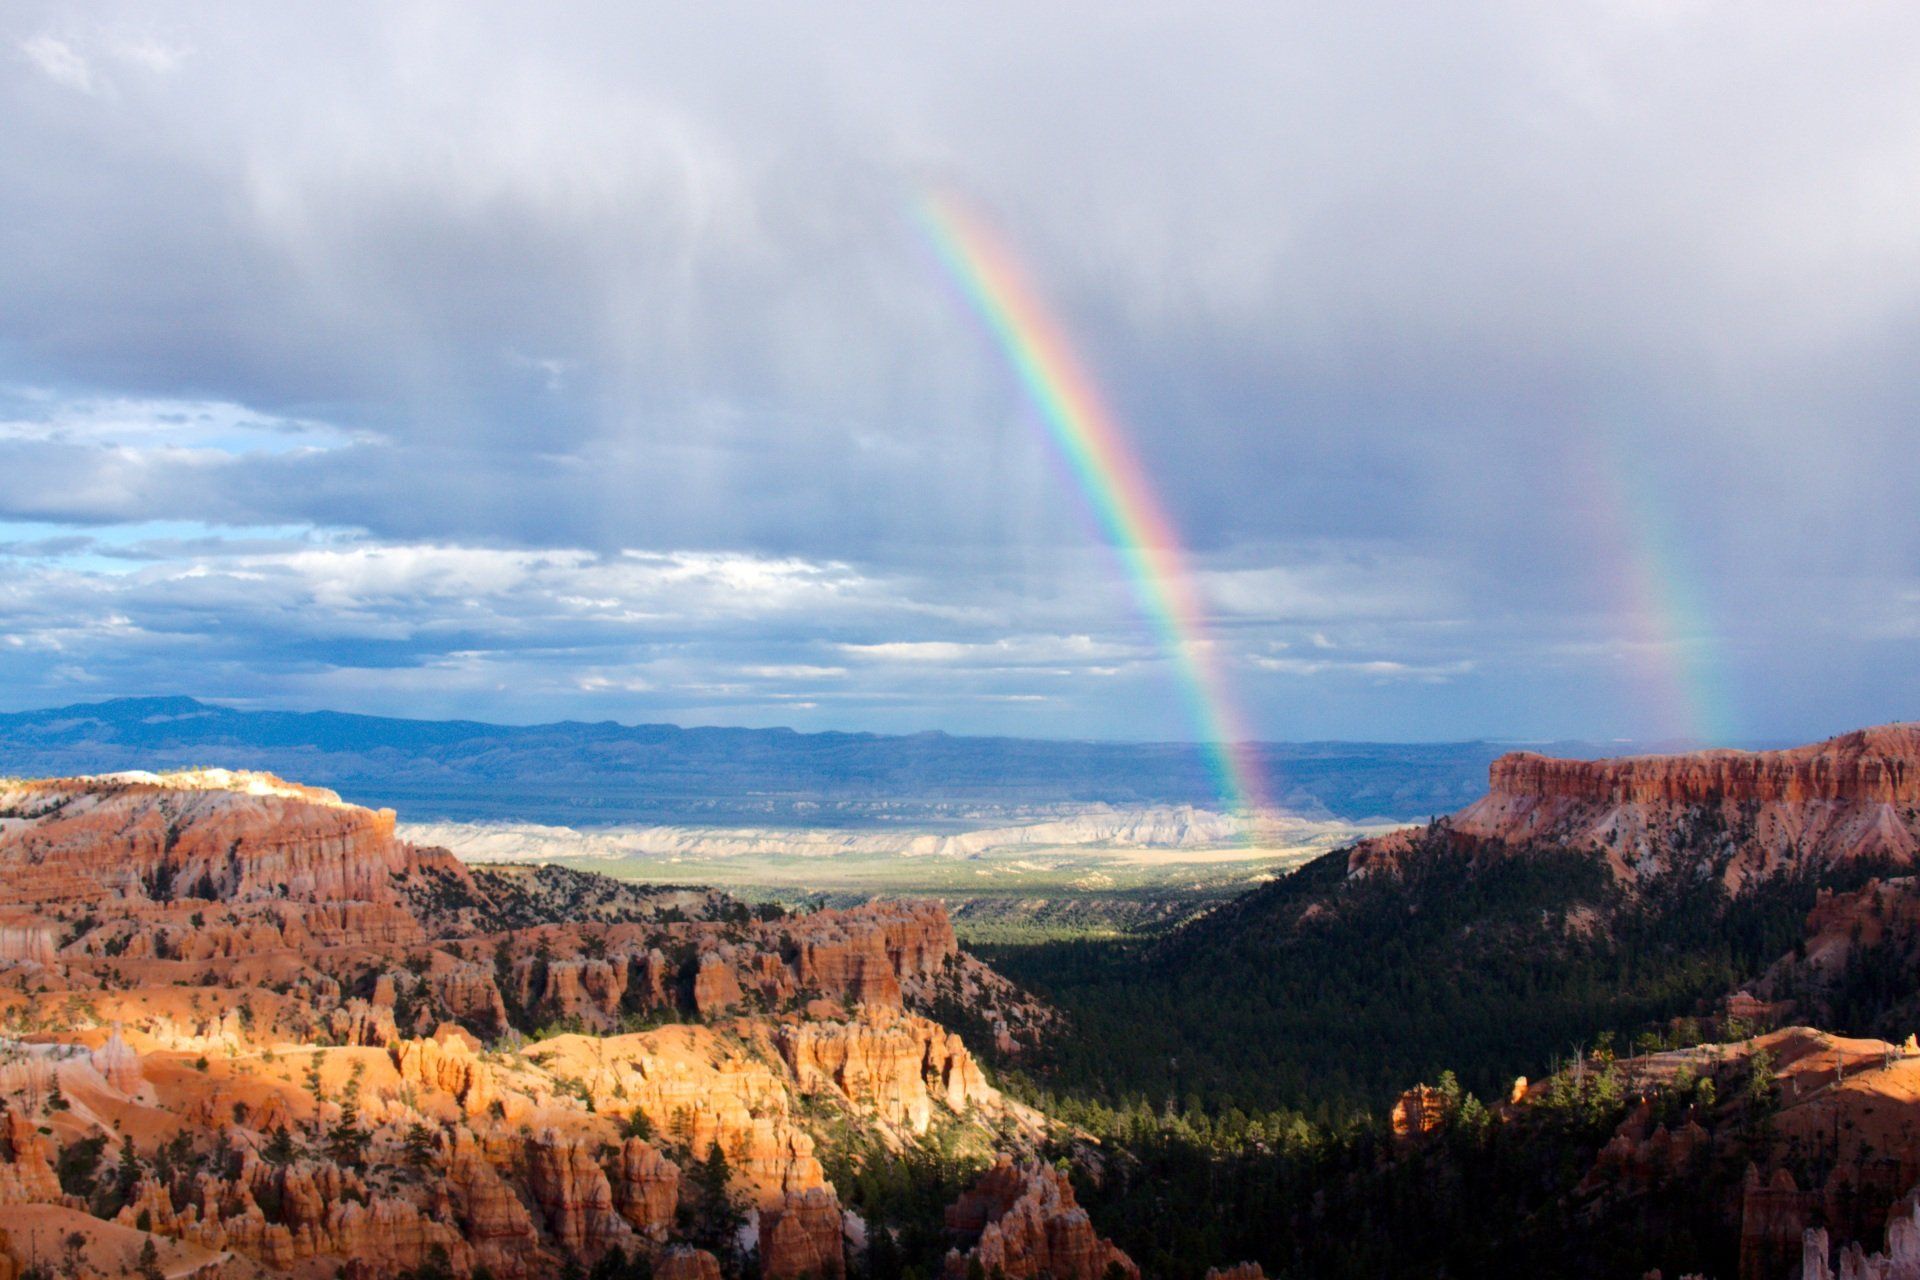 There is a double rainbow in the sky over a canyon.